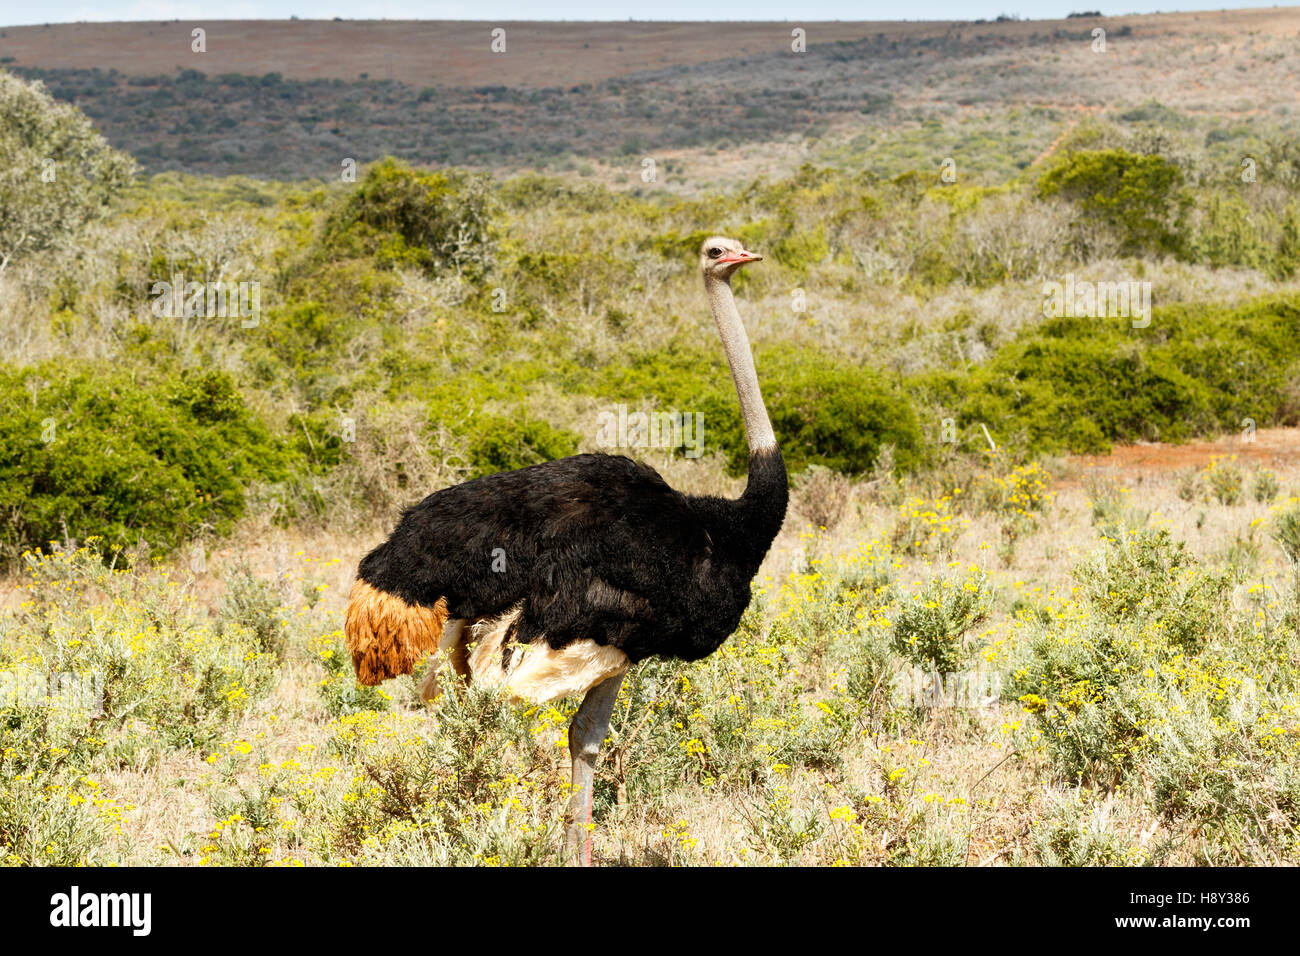 Ostrich in a green field with a hill in the background Stock Photo